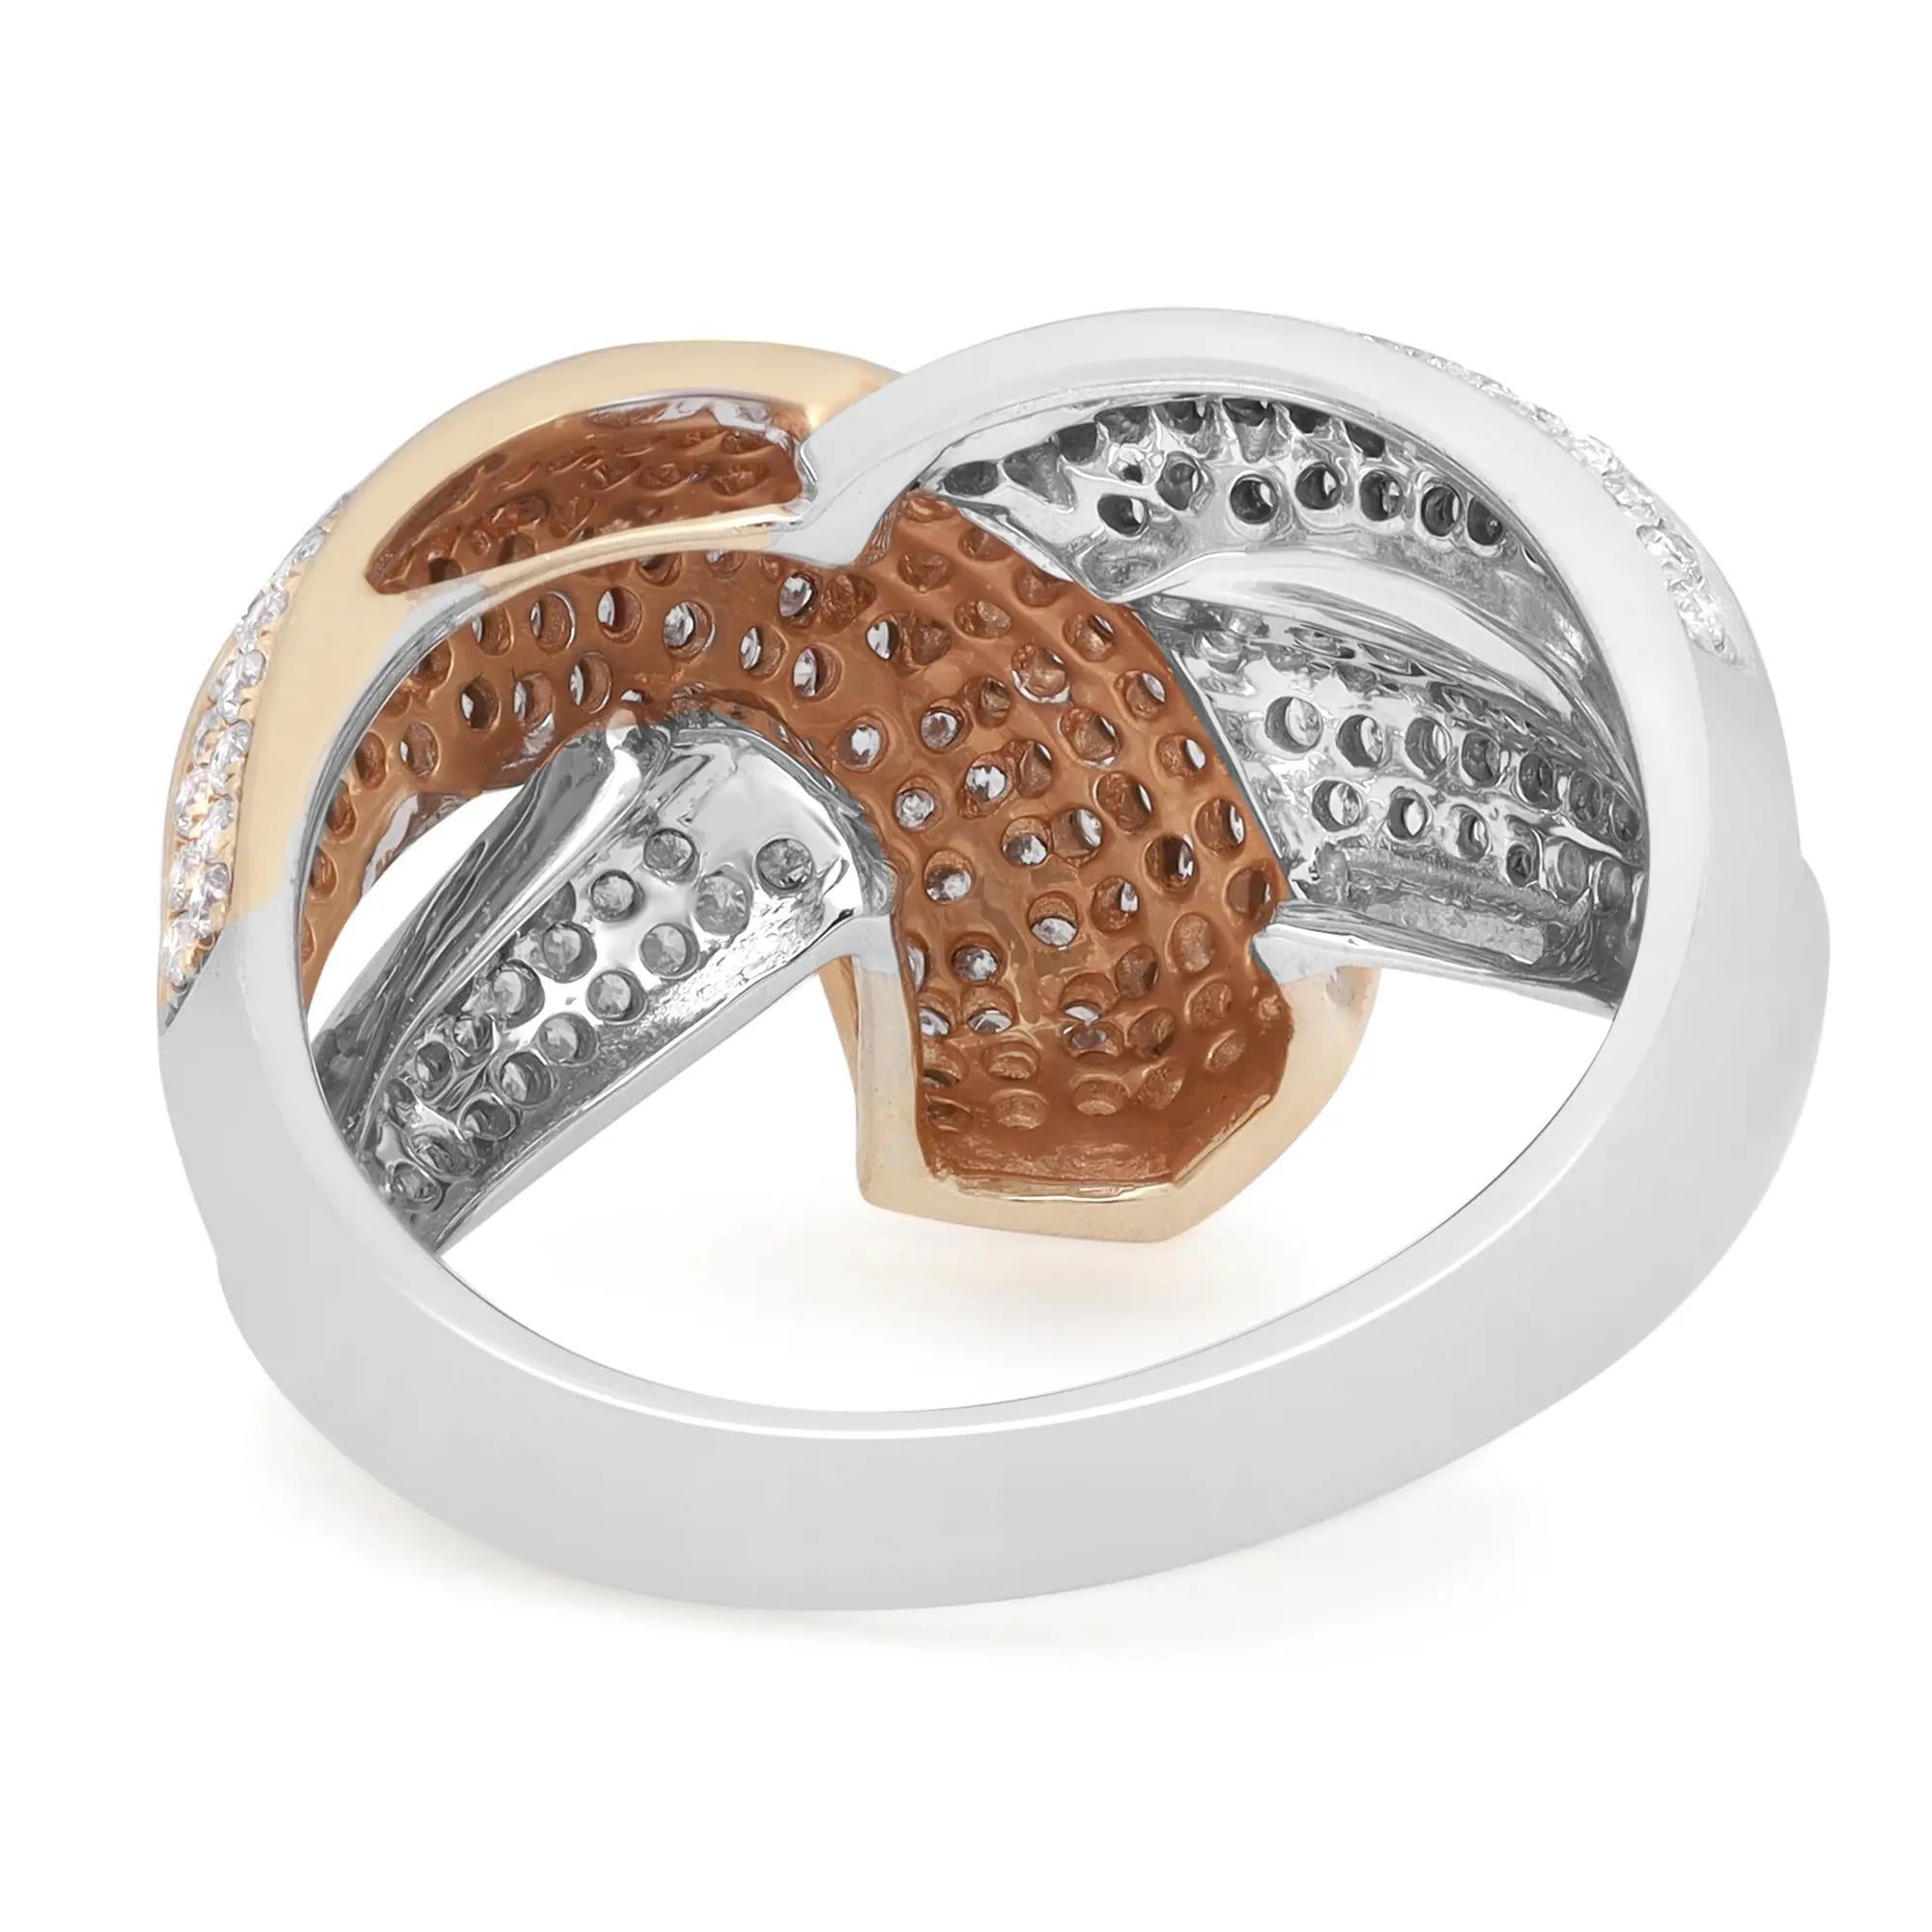 Presenting a luxury and bold two tone crisscross design natural diamond ring crafted in 14k white and yellow gold. This fancy ring is highlighted with 1.17 carats of dazzling white round cut diamonds with I color and SI1 clarity. The ring size is